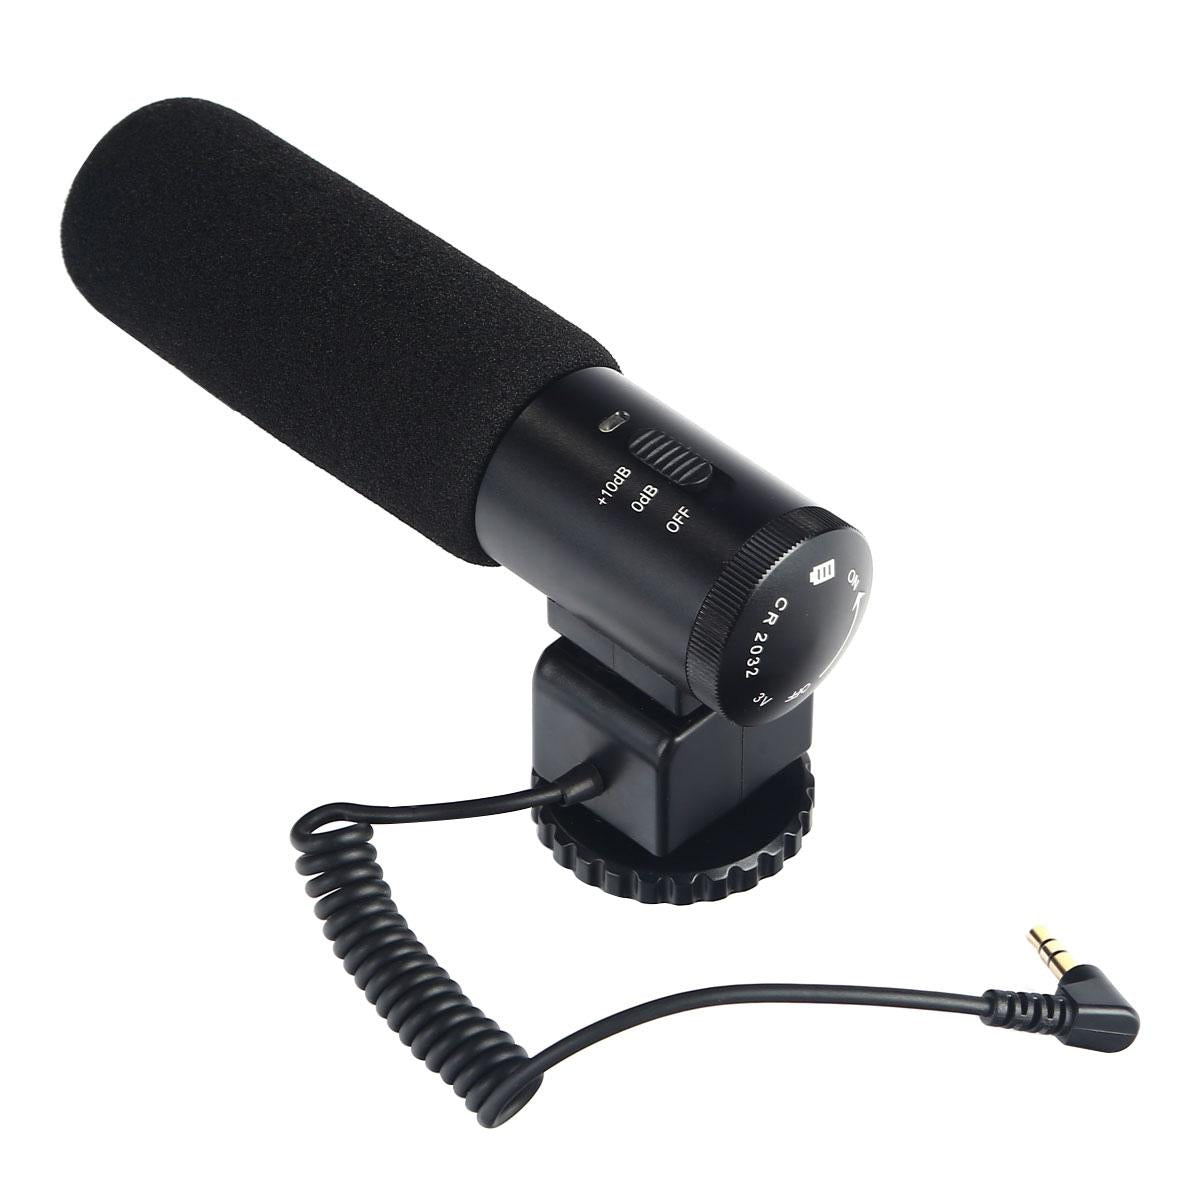 Product Image of K&F CM-500 Shotgun Microphone for DSLR Camera Video Photography